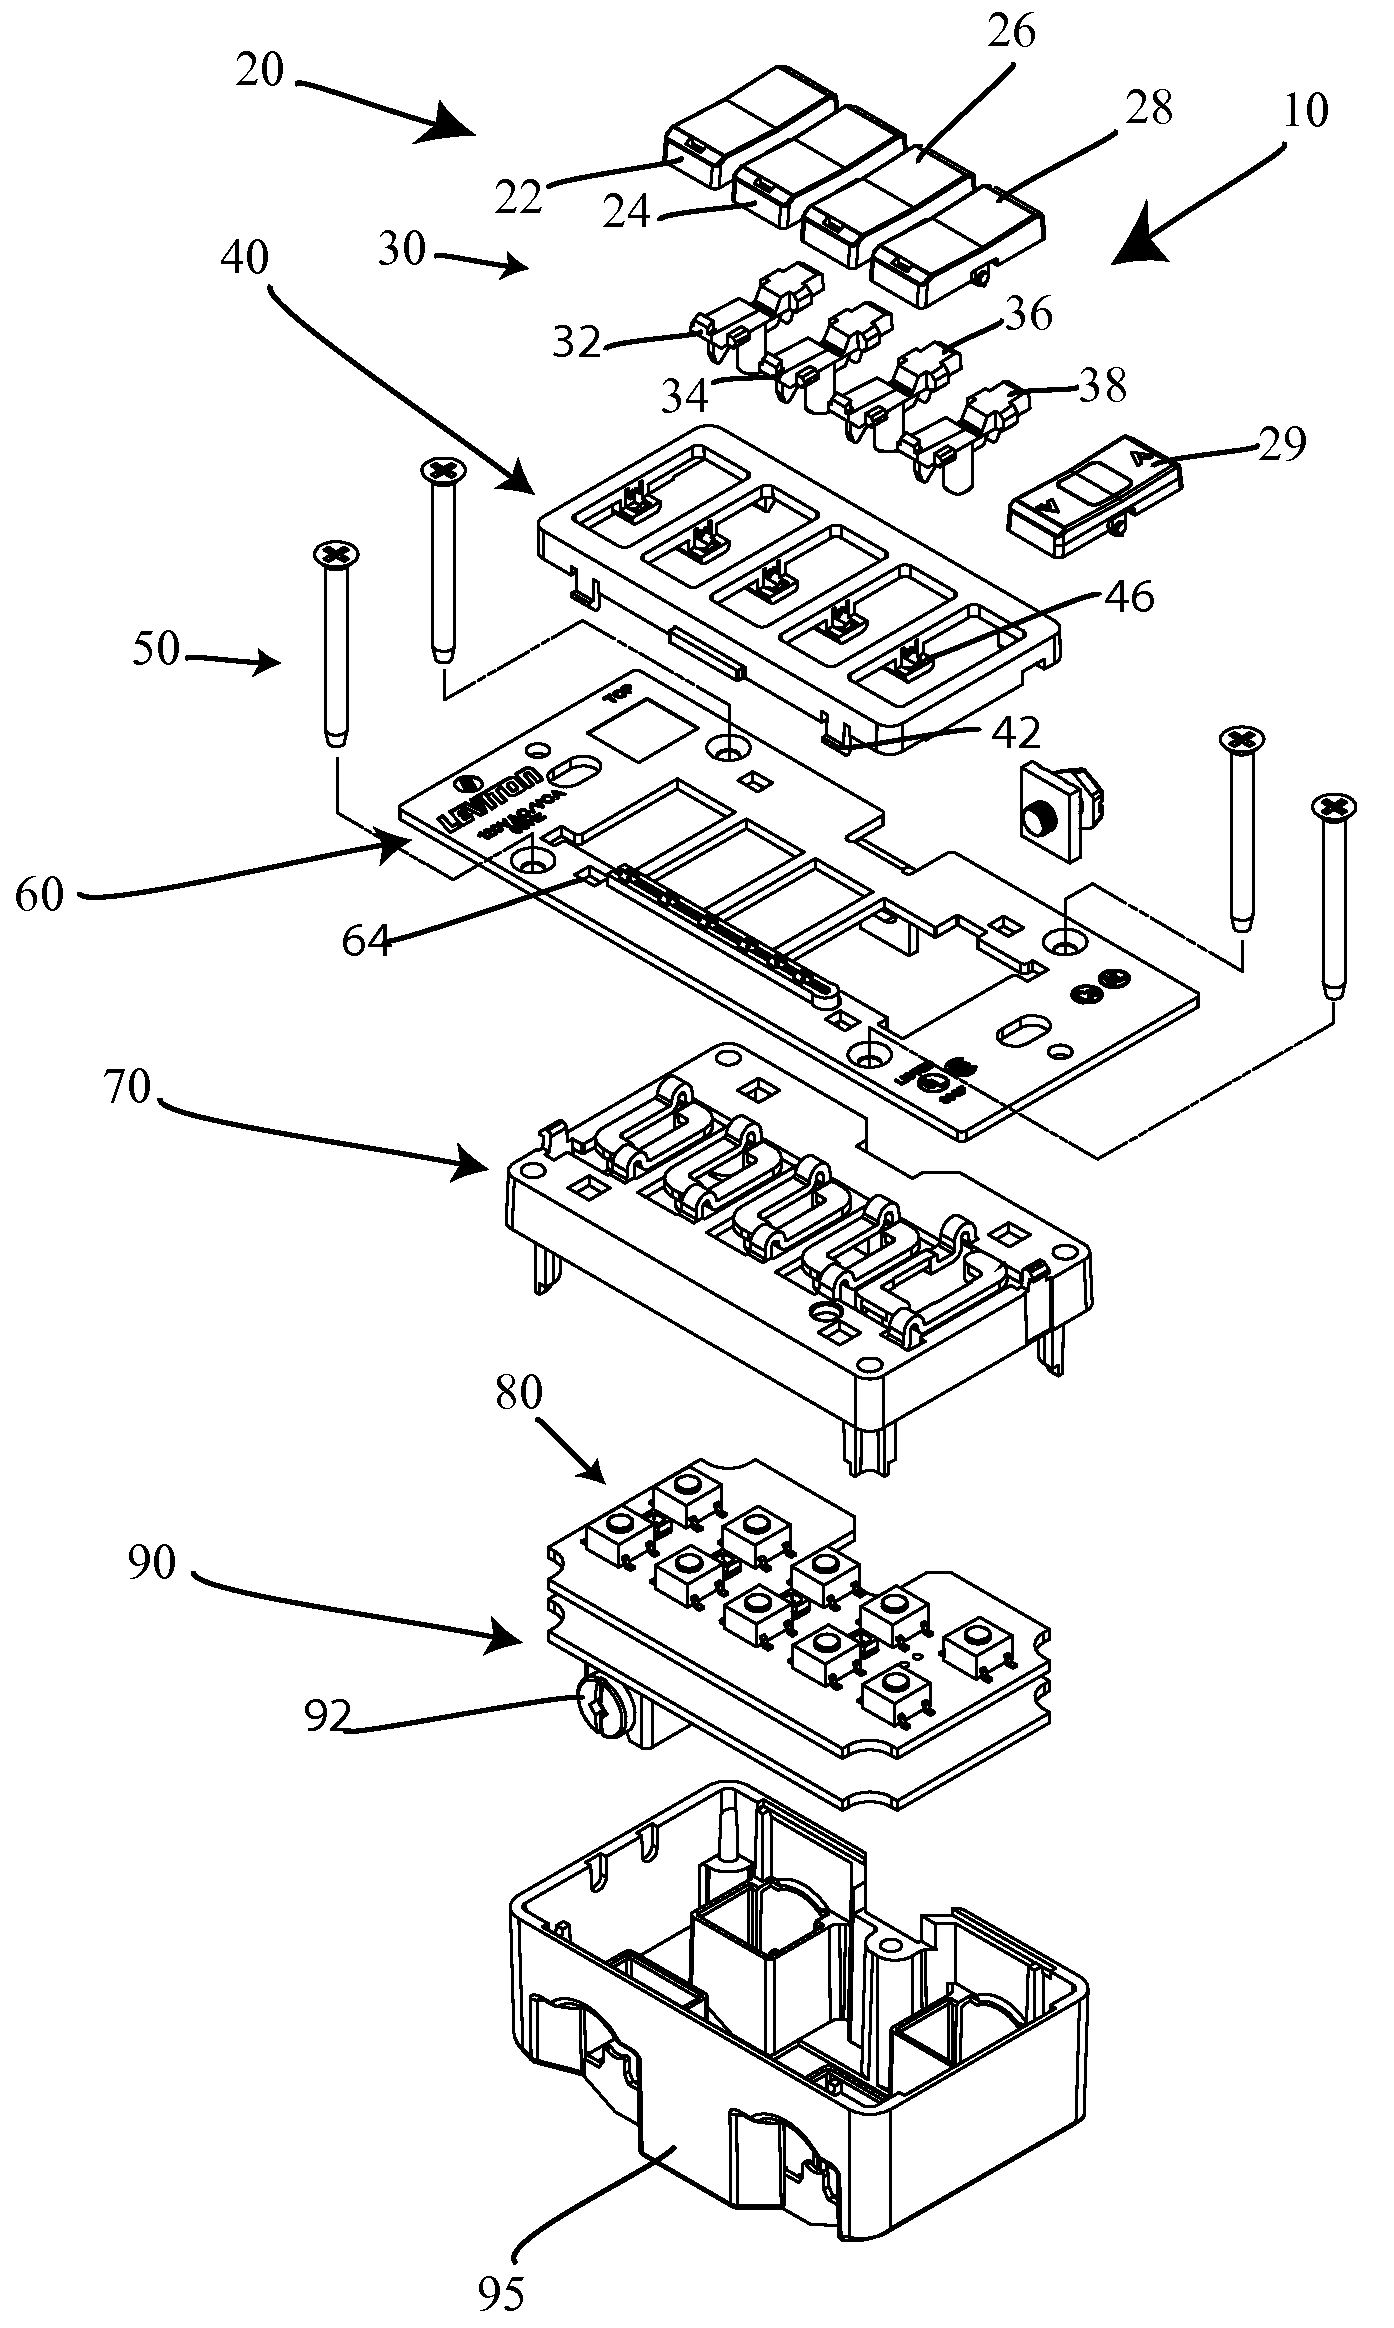 Electrical control device